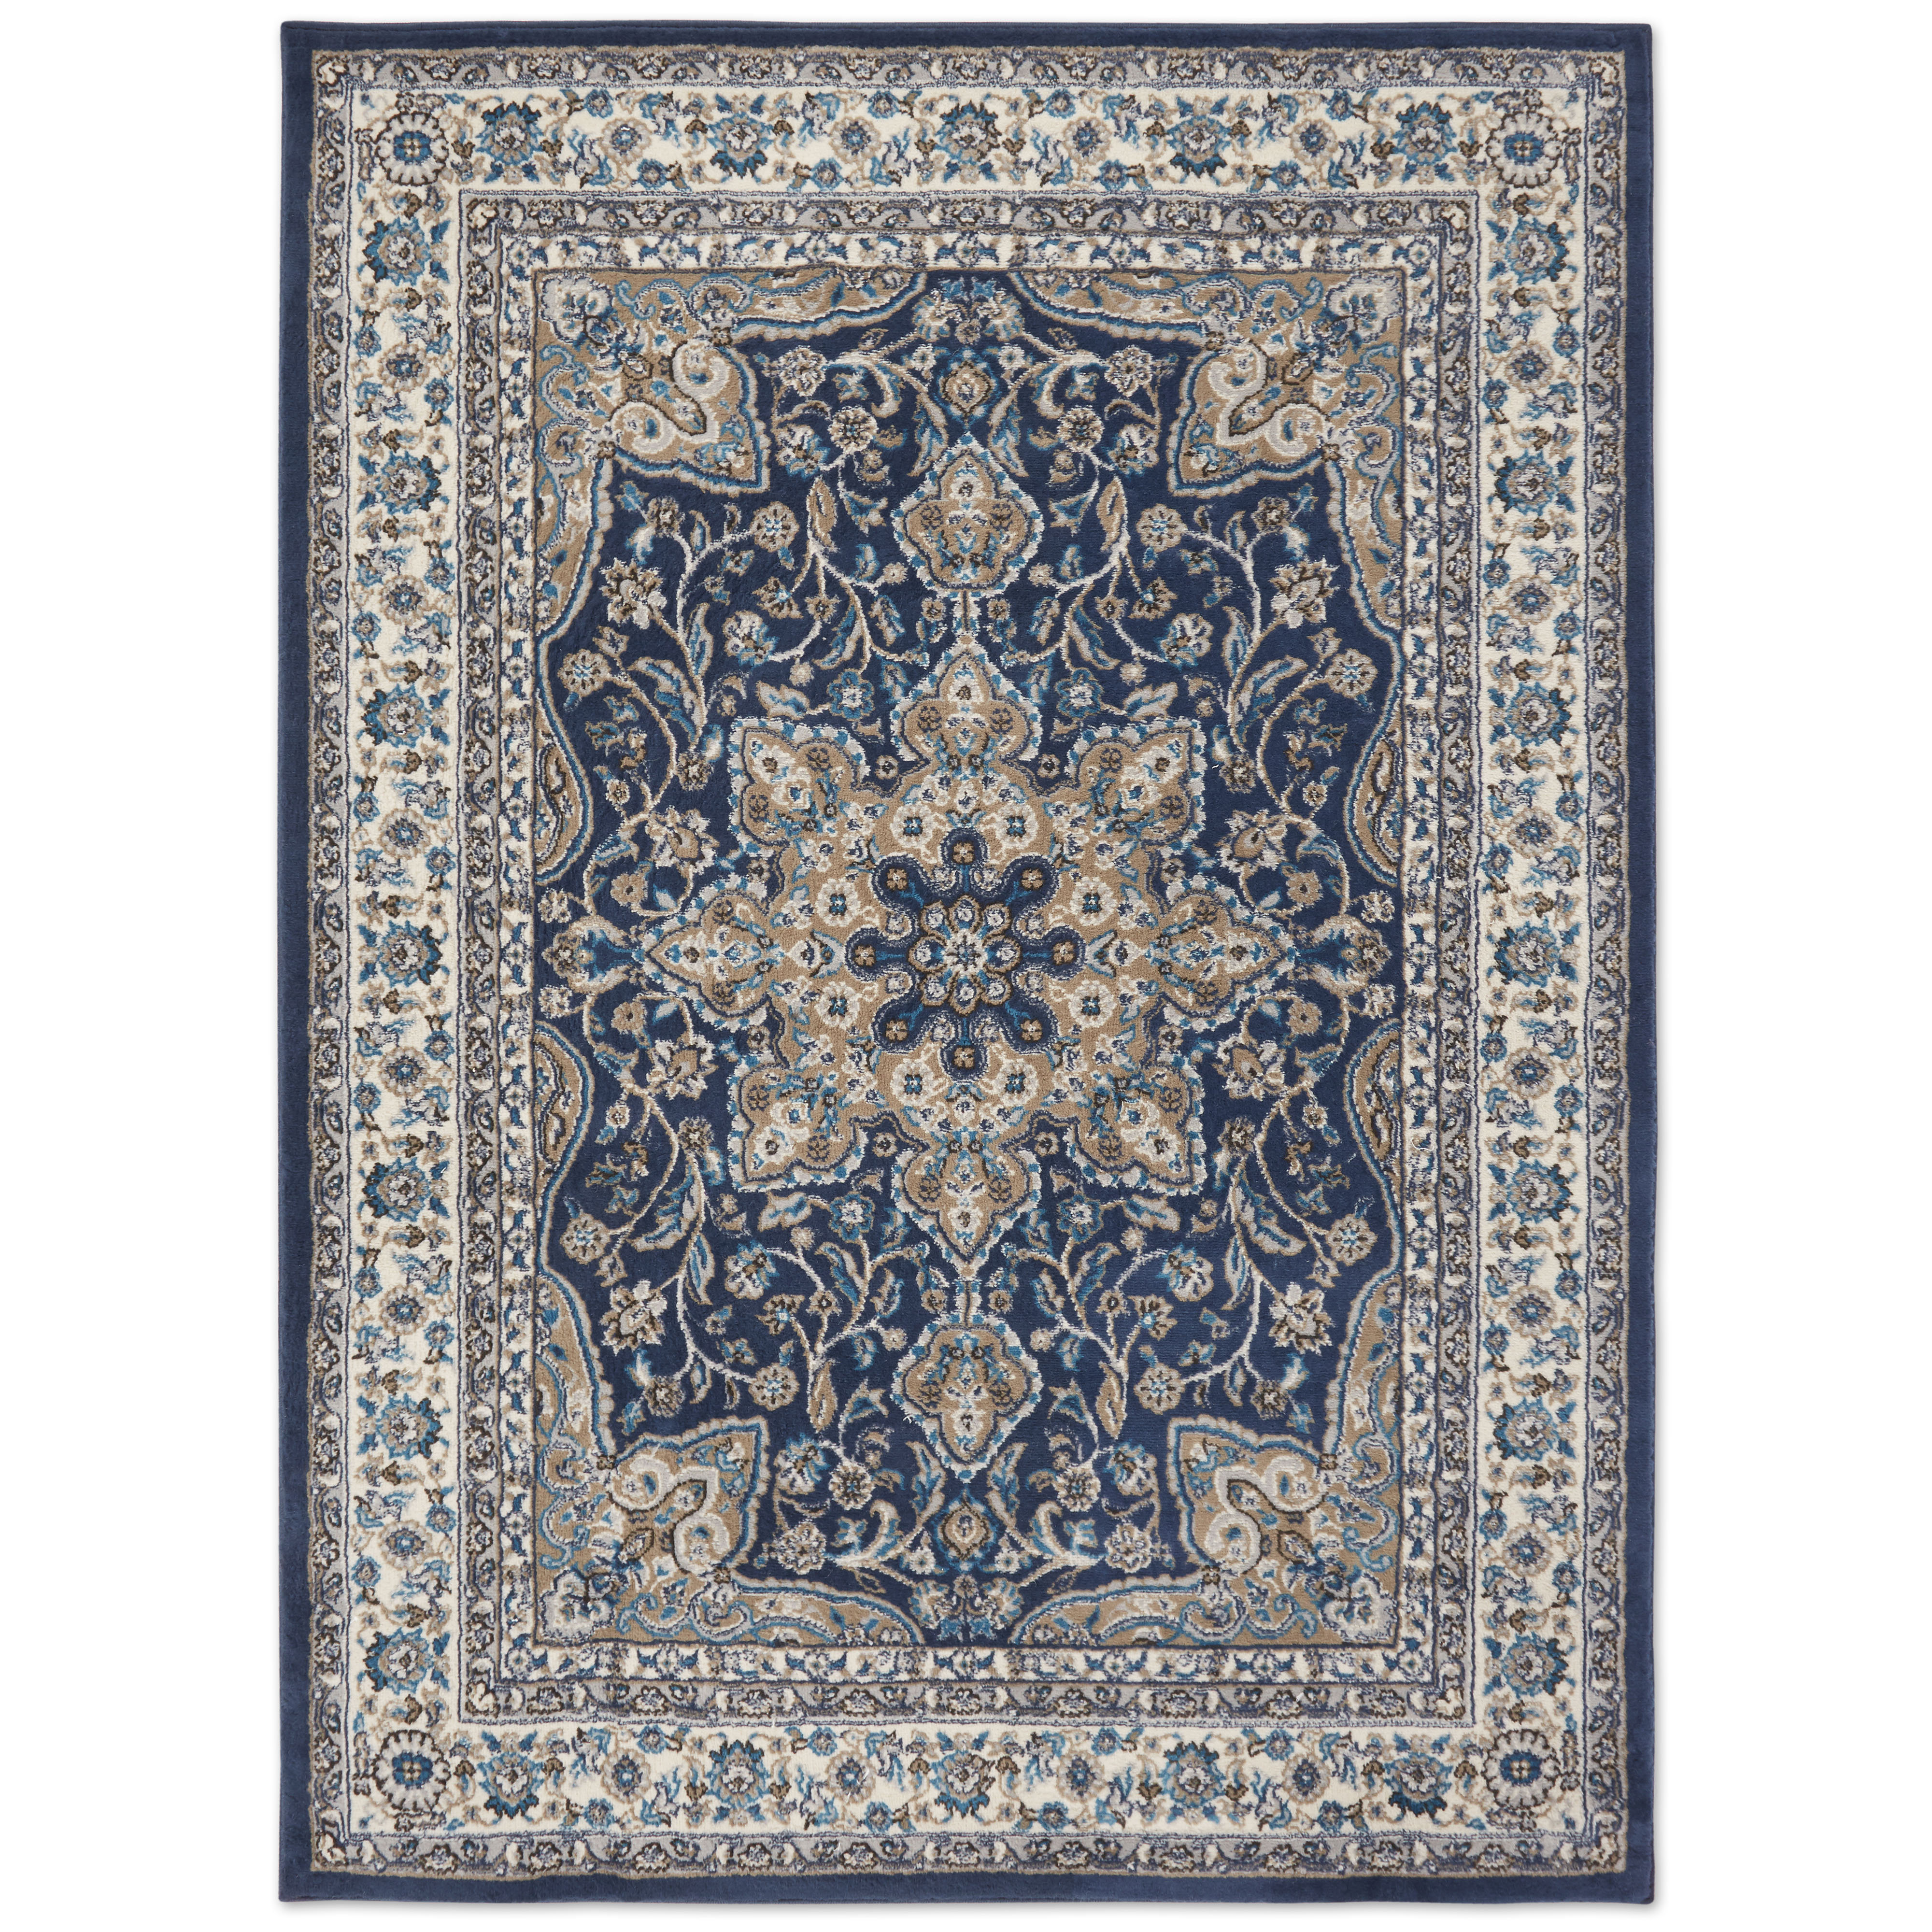 6'7x9'6 Oriental Weavers Traditional Area Rug Allure 054A